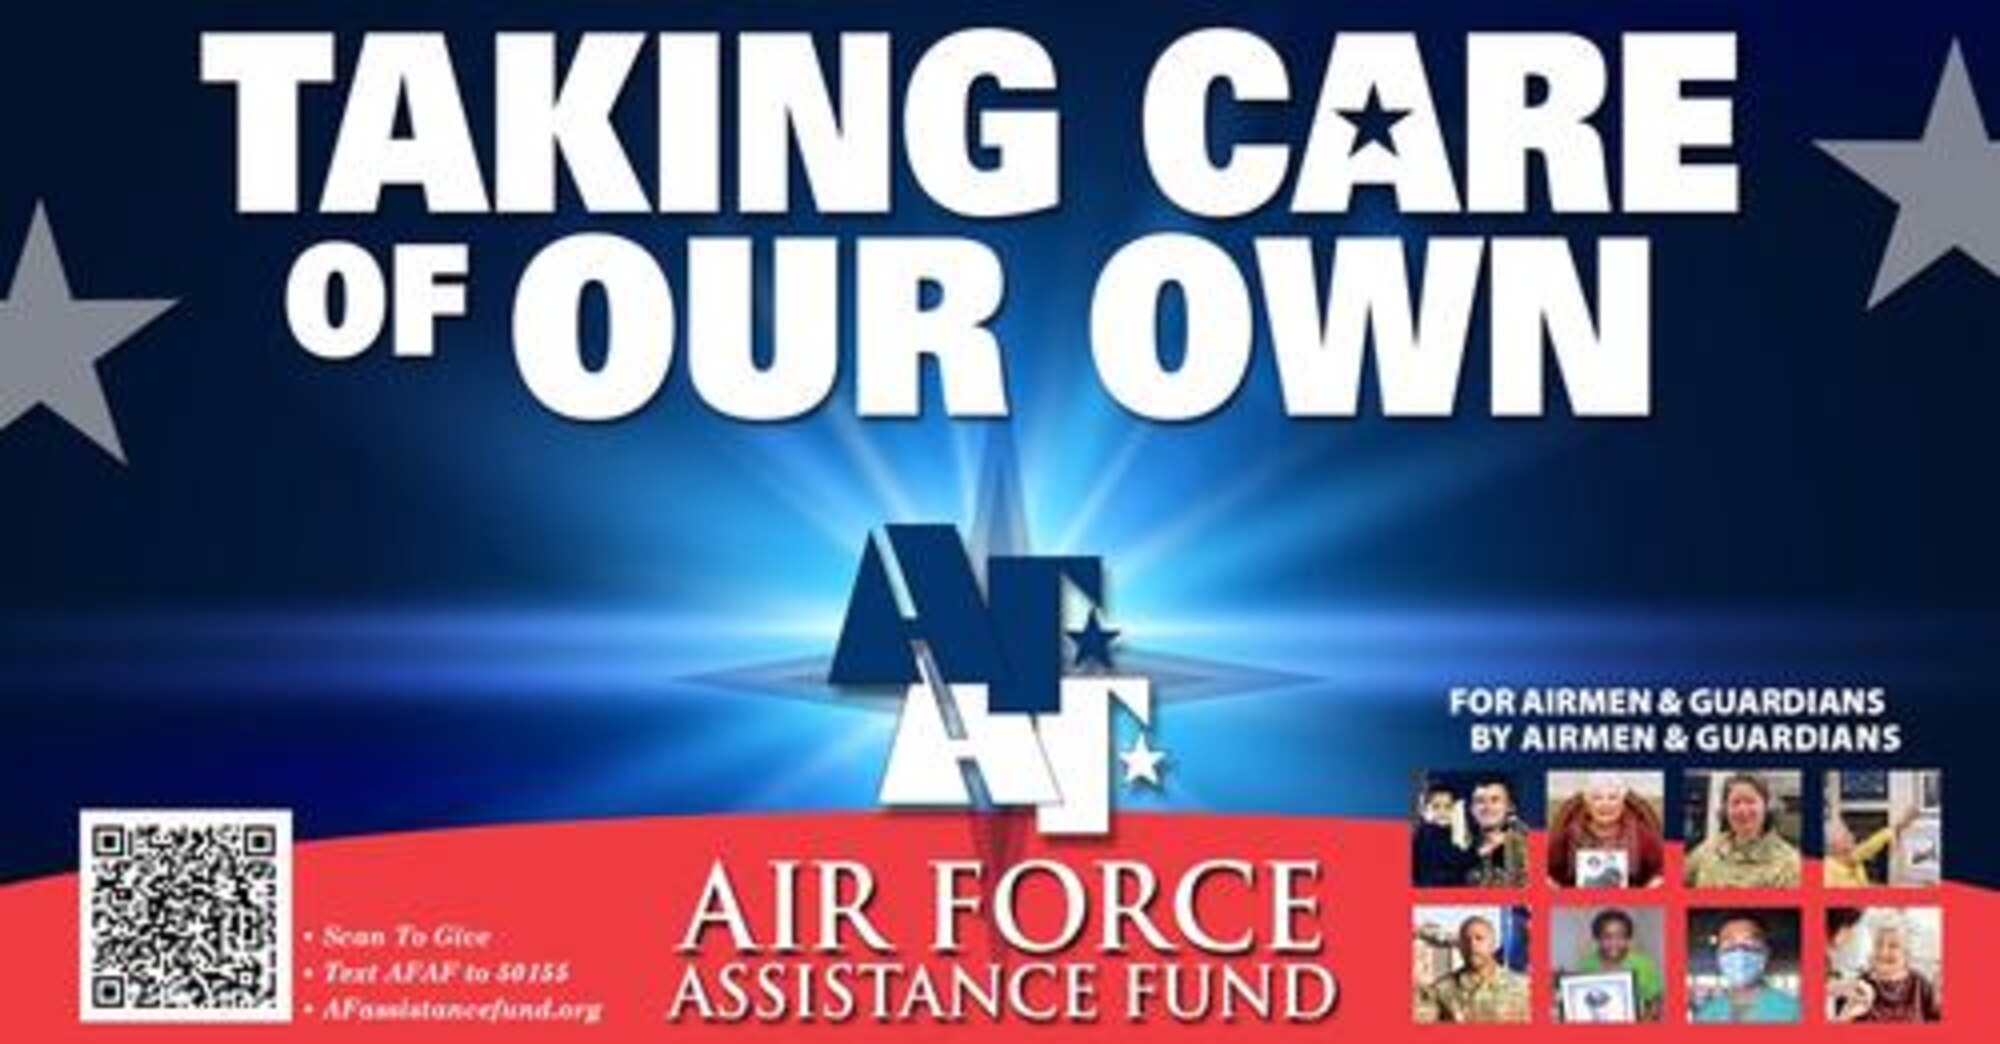 Last week to give. The annual Air Force Assistance Fund campaign to raise funds for charities that provide support to Air Force families in need is from March 21 through April 29. You can scan the QR code in the graphic to give.